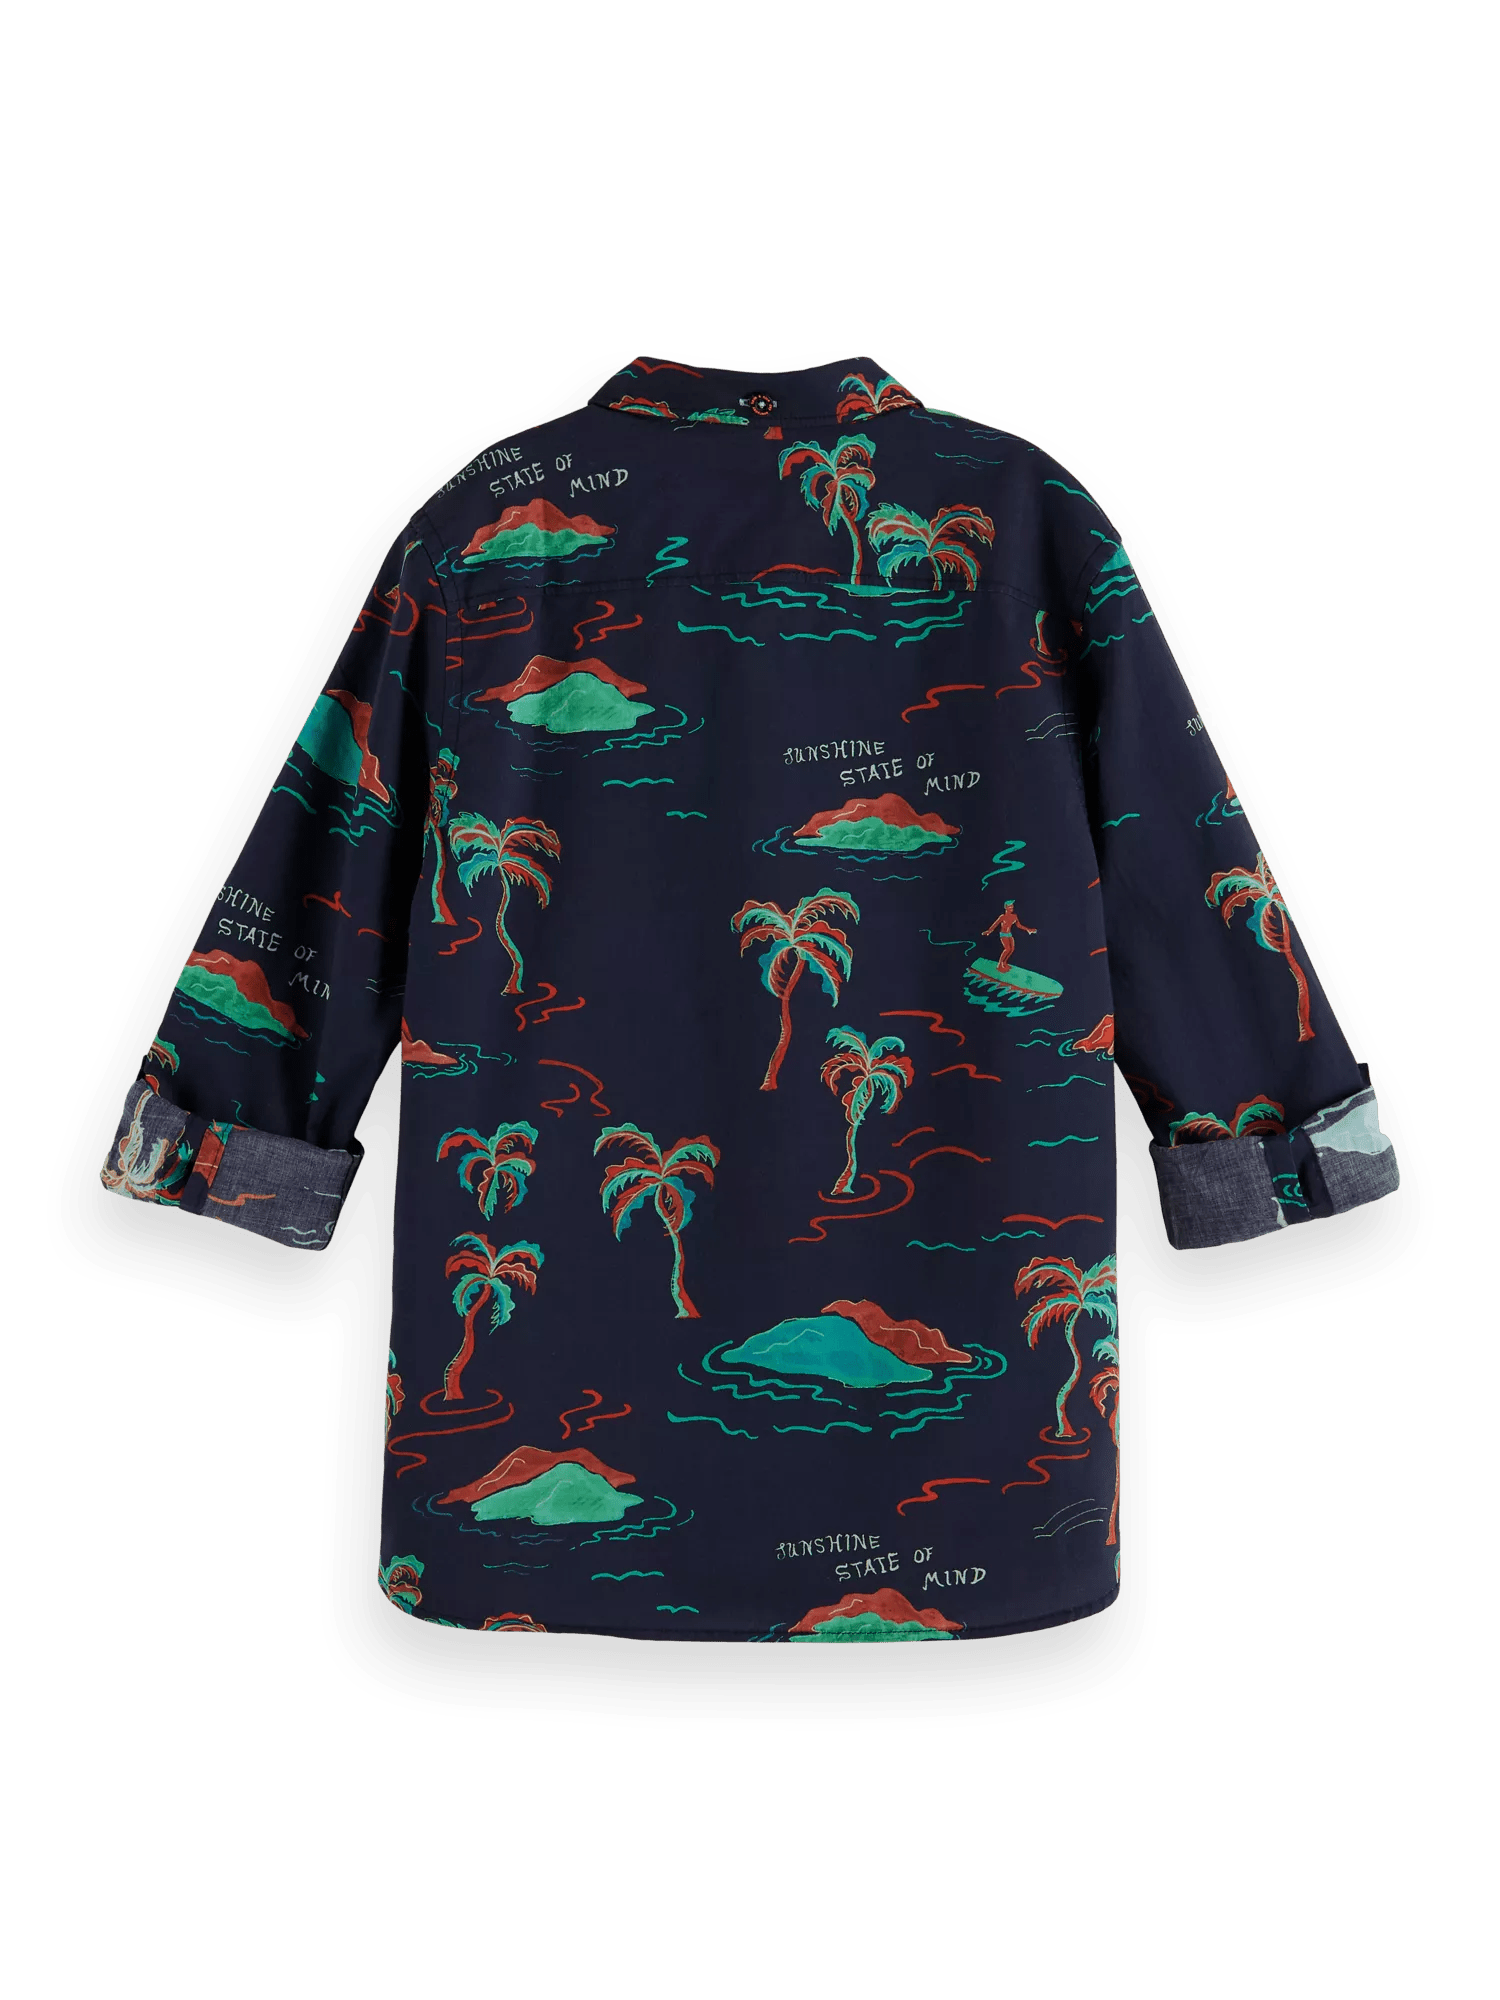 Scotch & Soda All-over printed long-sleeved shirt BCK